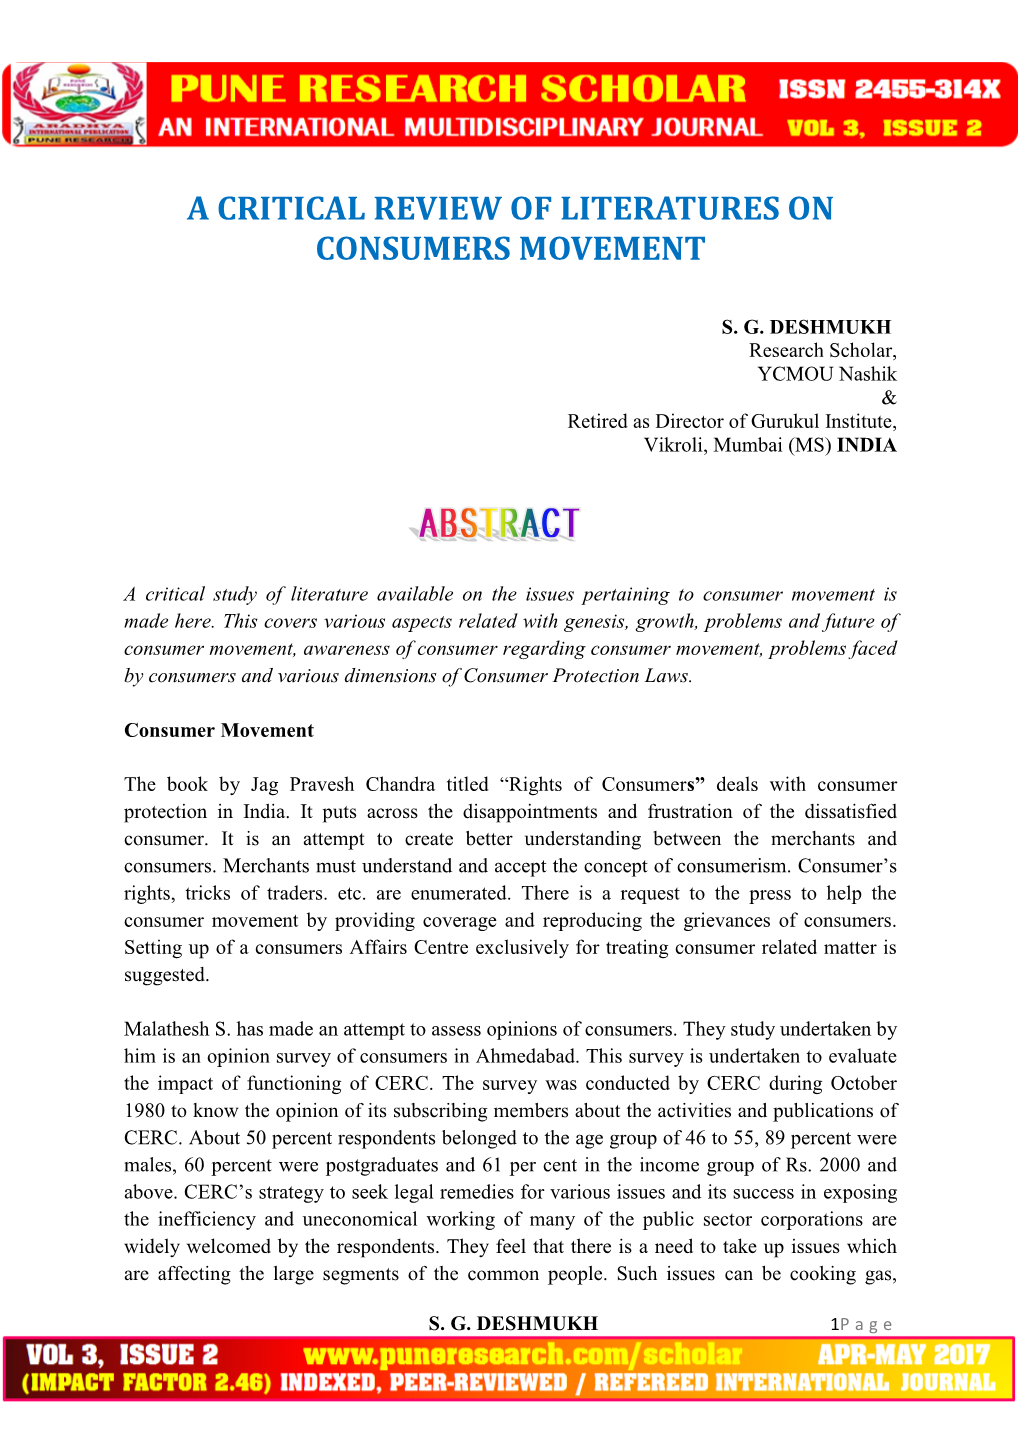 A Critical Review of Literatures on Consumers Movement